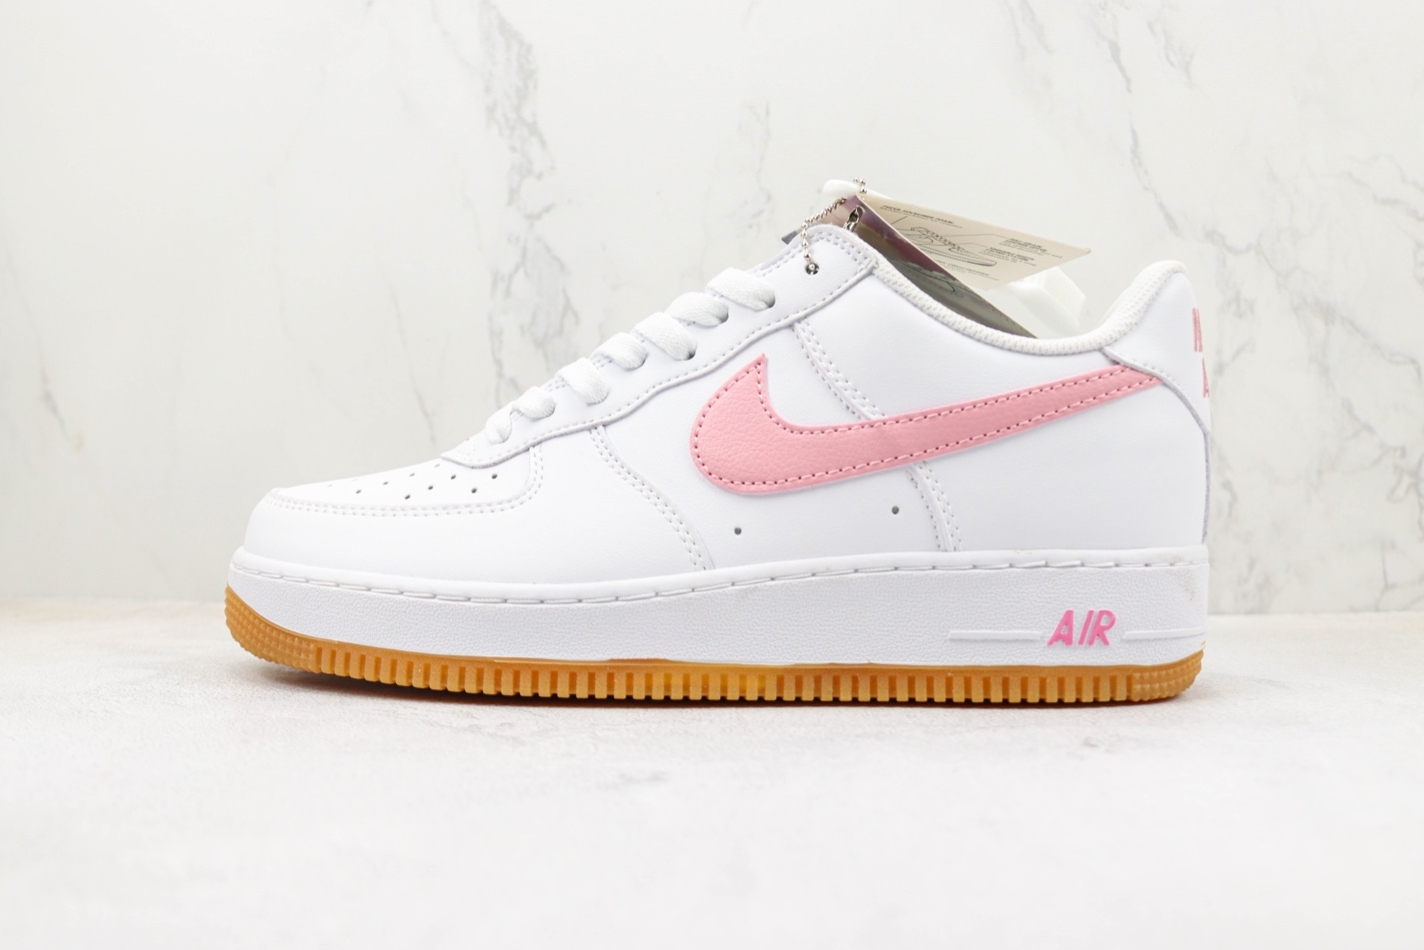 Nike Air Force 1 Low '07 Retro Pink Gum DM0576-101 | Limited Edition Sneakers